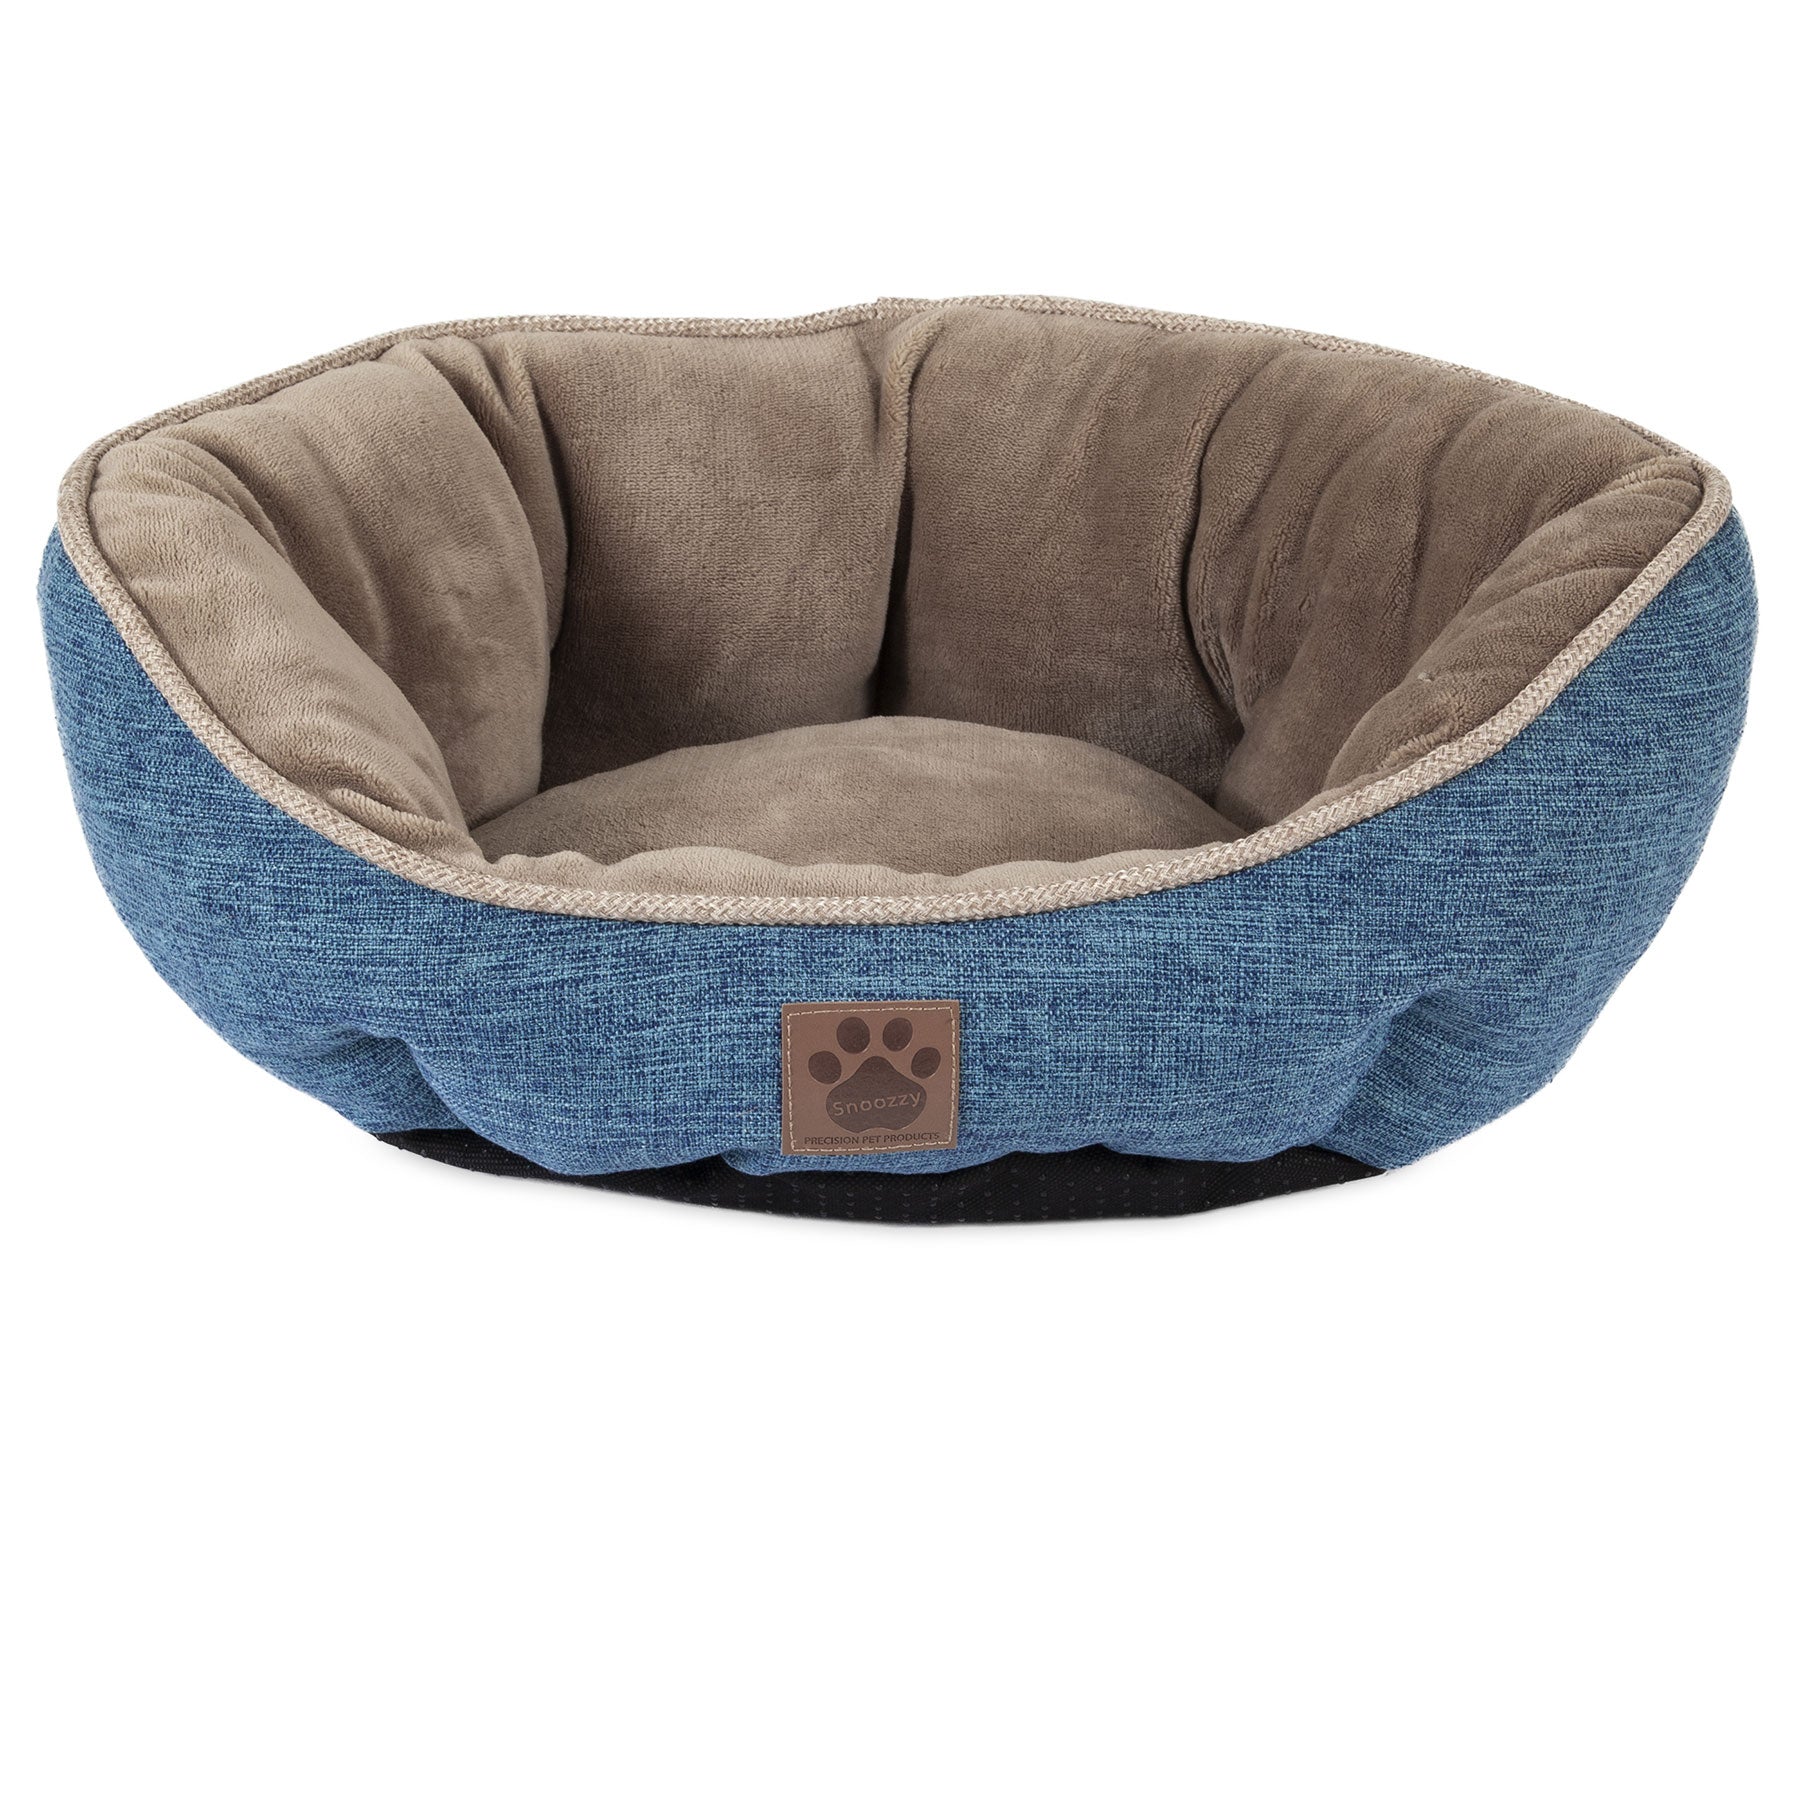 SnooZZy Rustic Elegance Clamshell Pet Bed